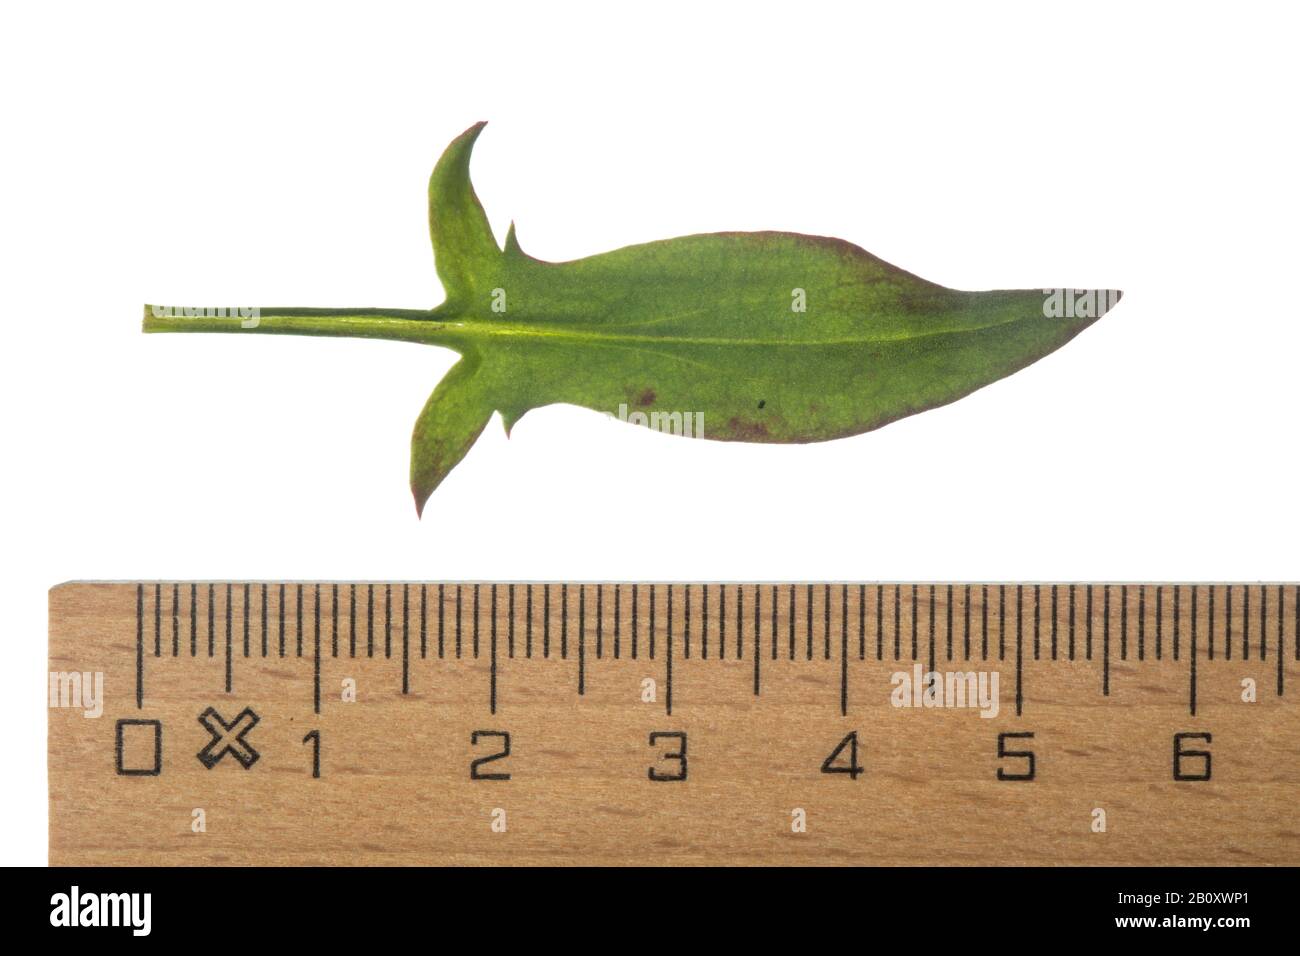 Sheep's Sorrel, Red Sorrel, Sour Weed, Field Sorrel (Rumex acetosella), leaf, cutout with ruler, Germany Stock Photo